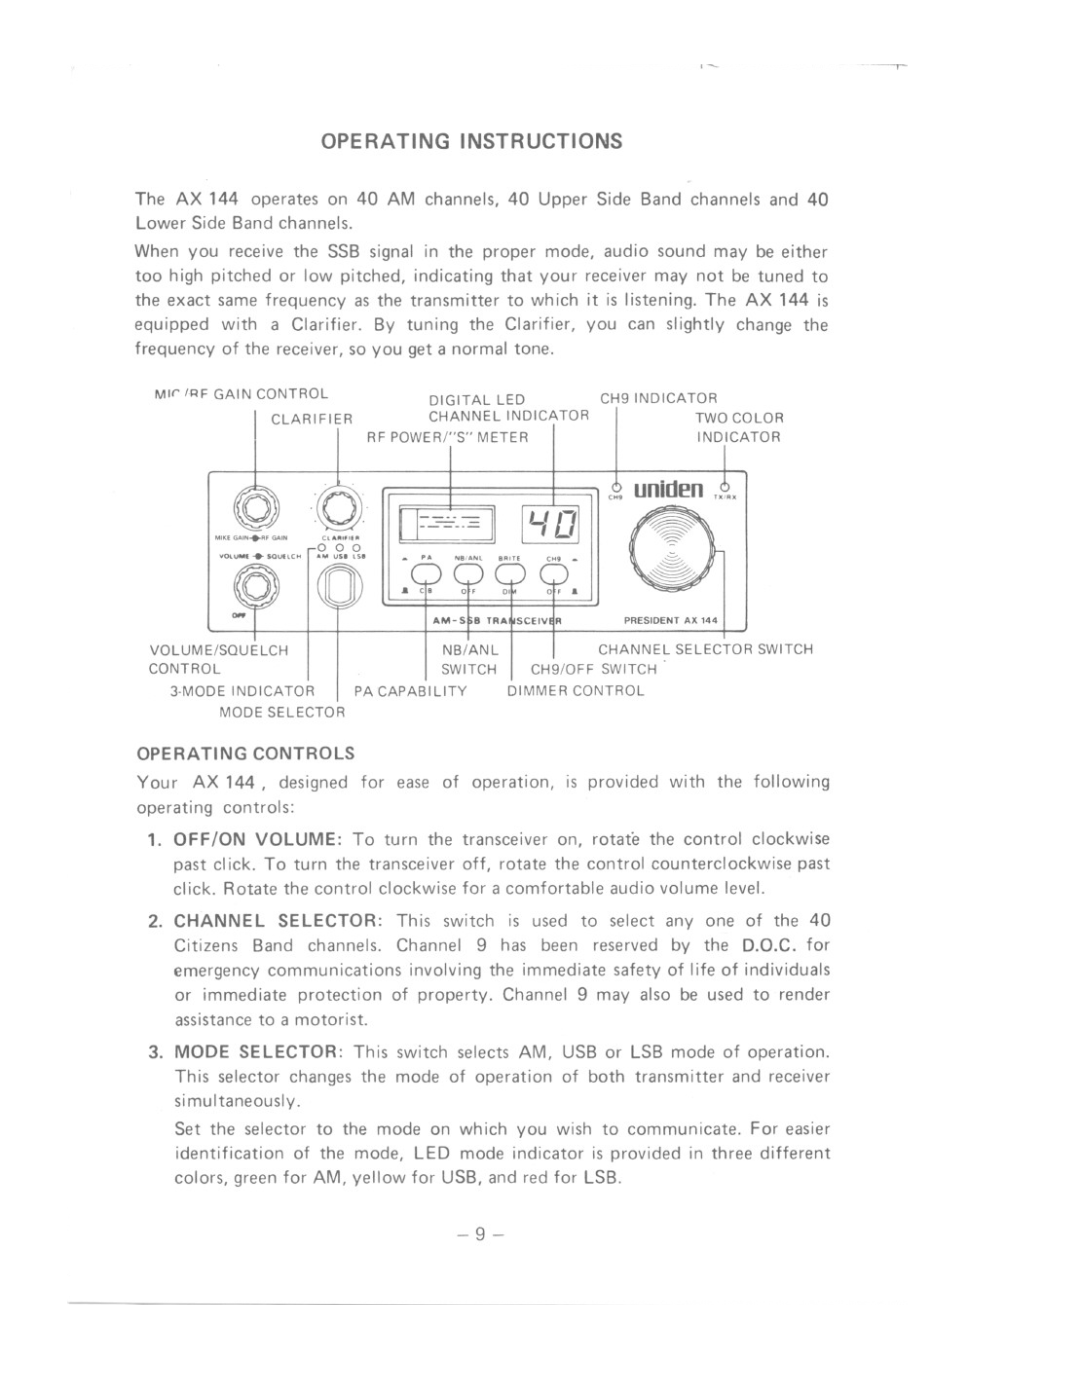 Uniden AX 144 owner manual Operating Instructions, uniden 